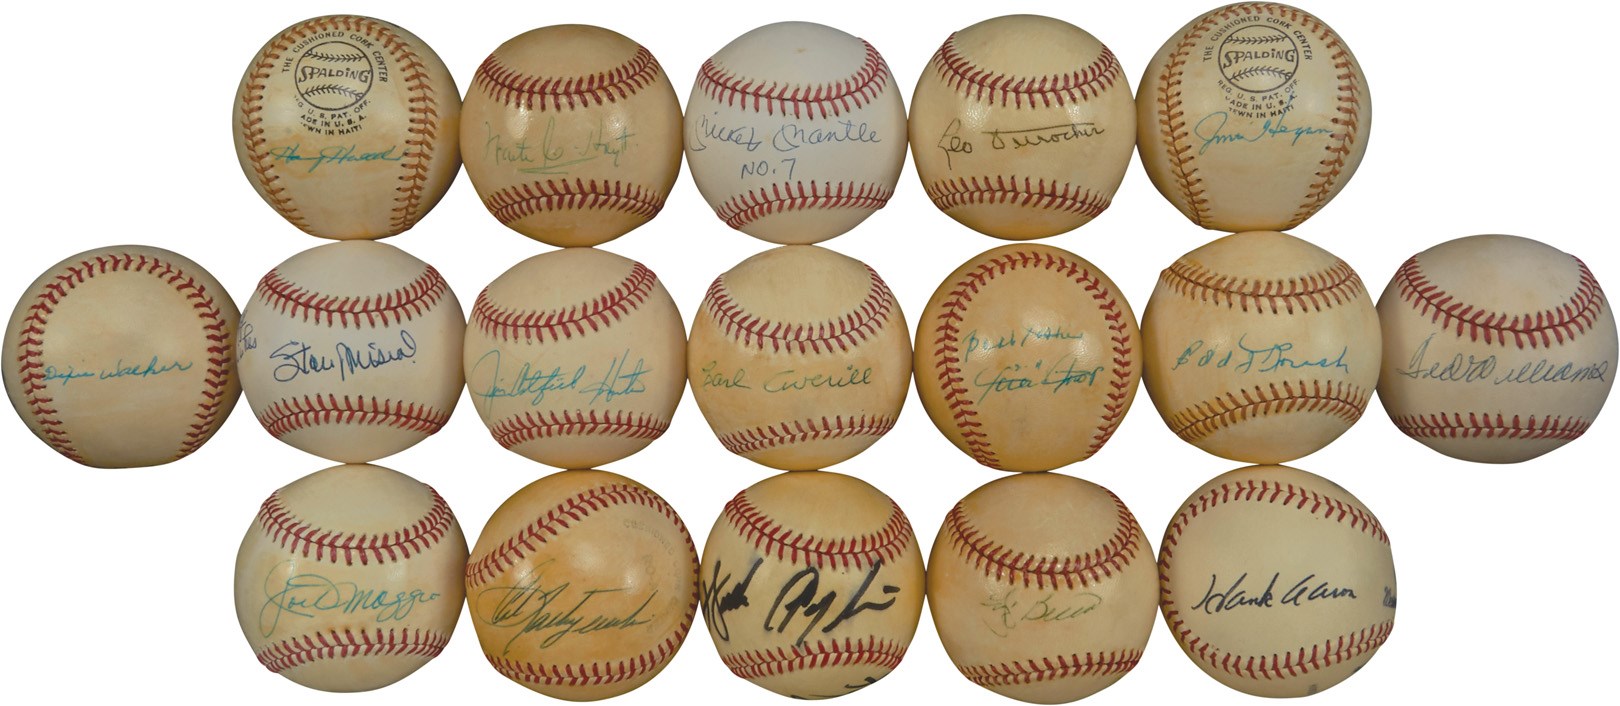 Hall of Famers and Older Legends Single-Signed Baseball Collection (120+)